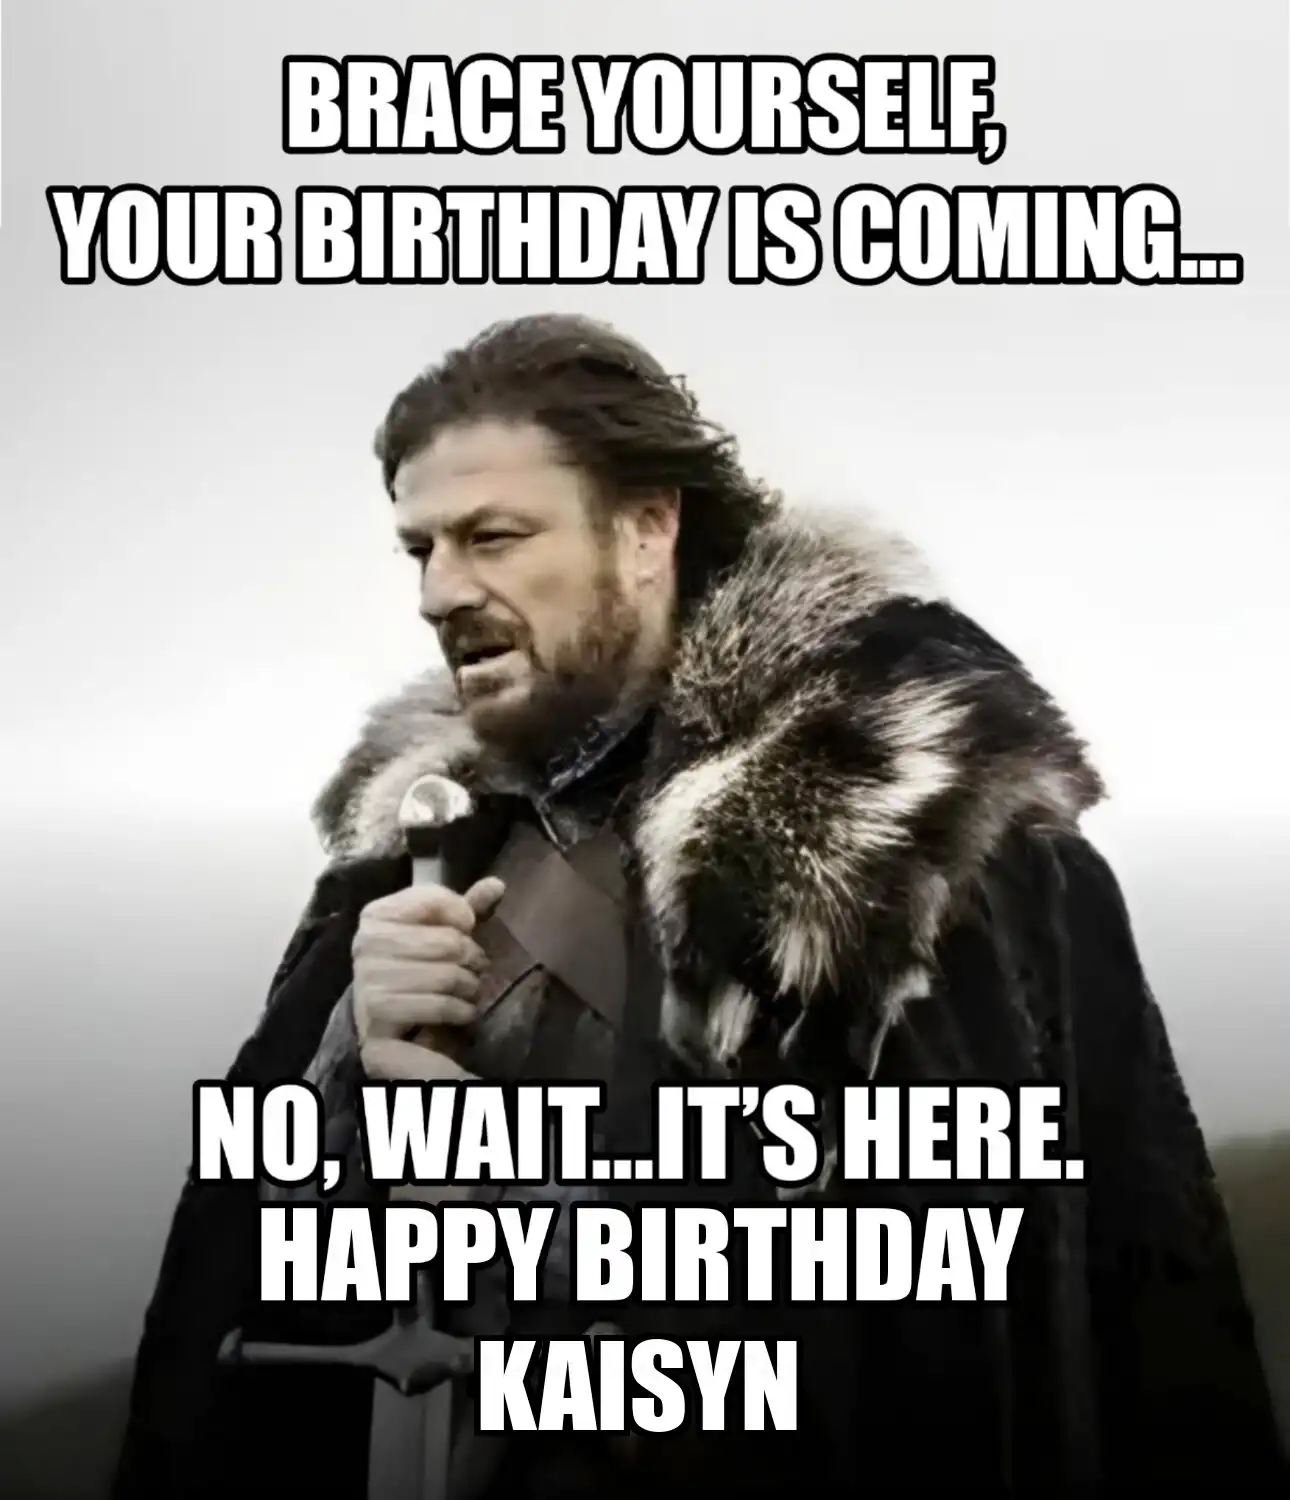 Happy Birthday Kaisyn Brace Yourself Your Birthday Is Coming Meme